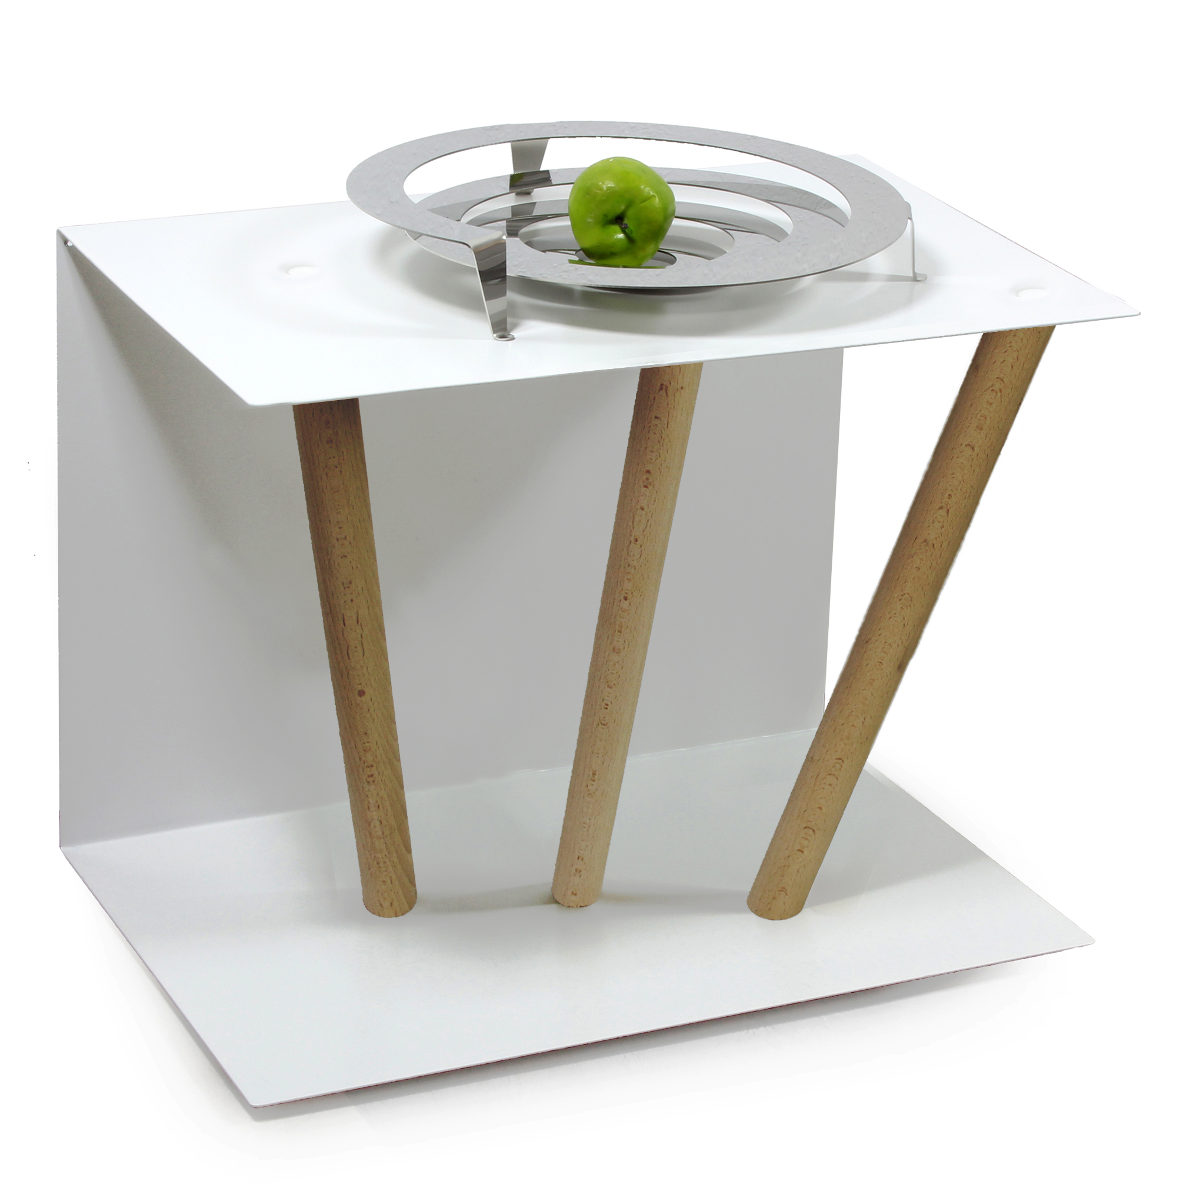 Stainless Steel Sidetable With Three, Stainless Steel Side Table Legs